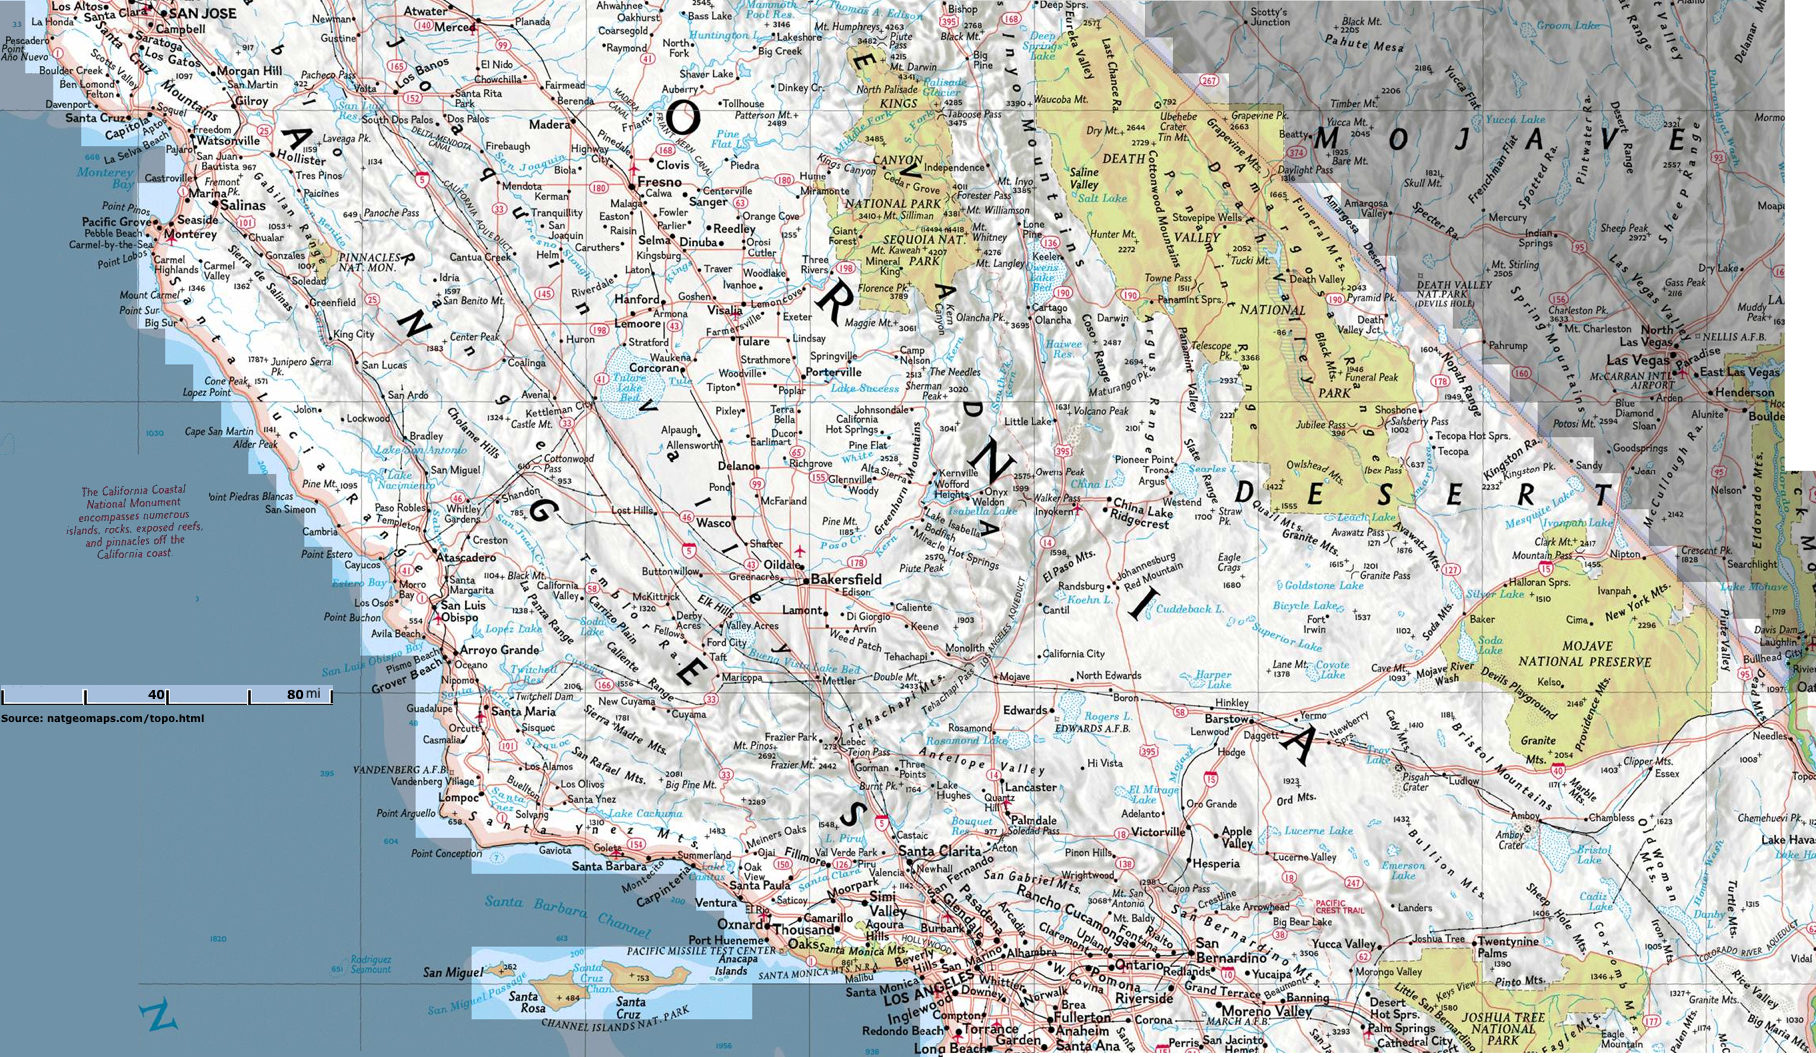 South Central California And Map Google - Touran - Map Of Central And Southern California Coast